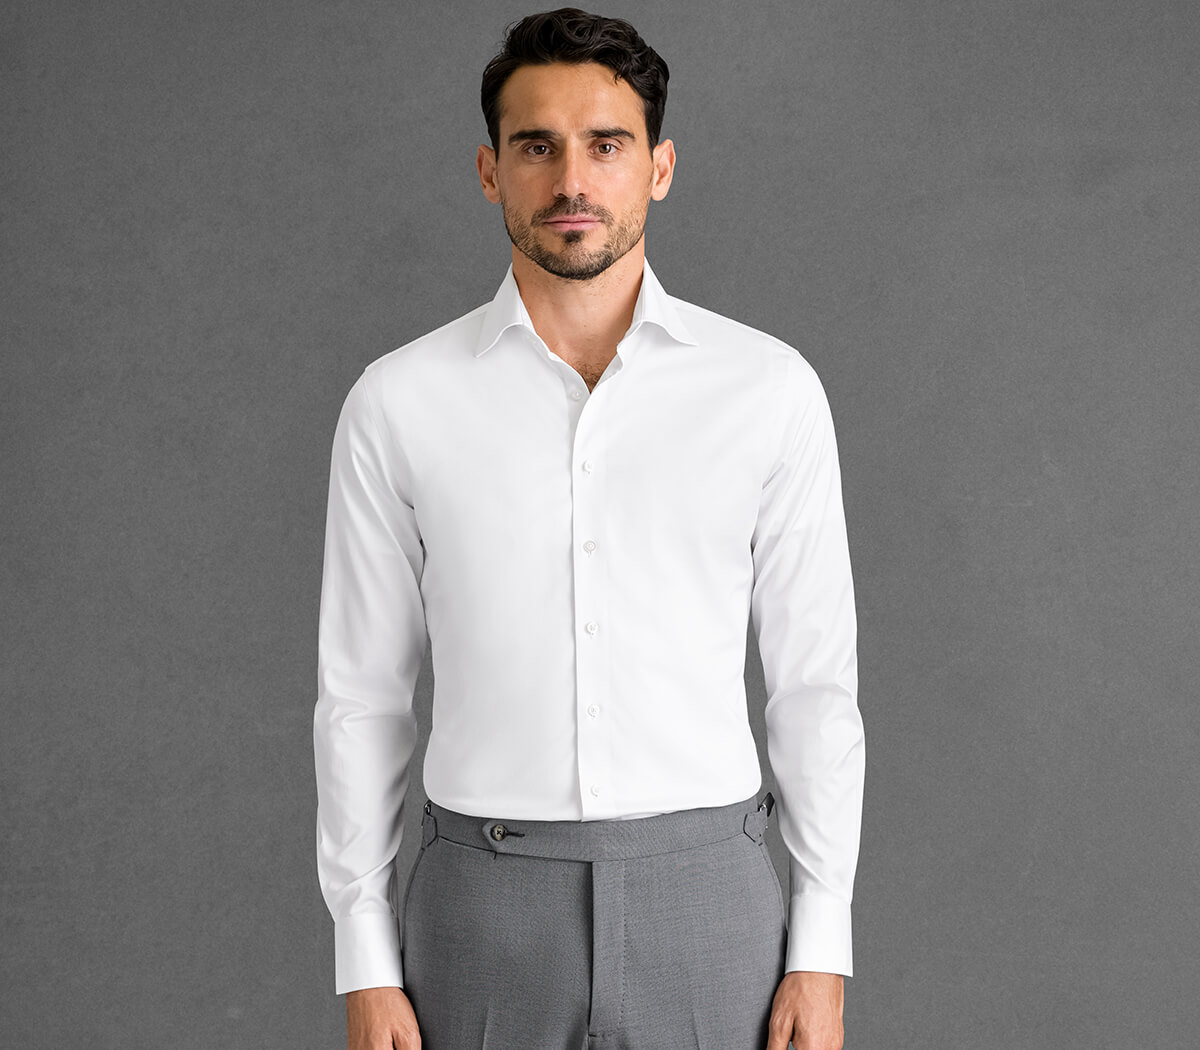 The Business Shirt Guide  Best shirts for the office - Proper Cloth